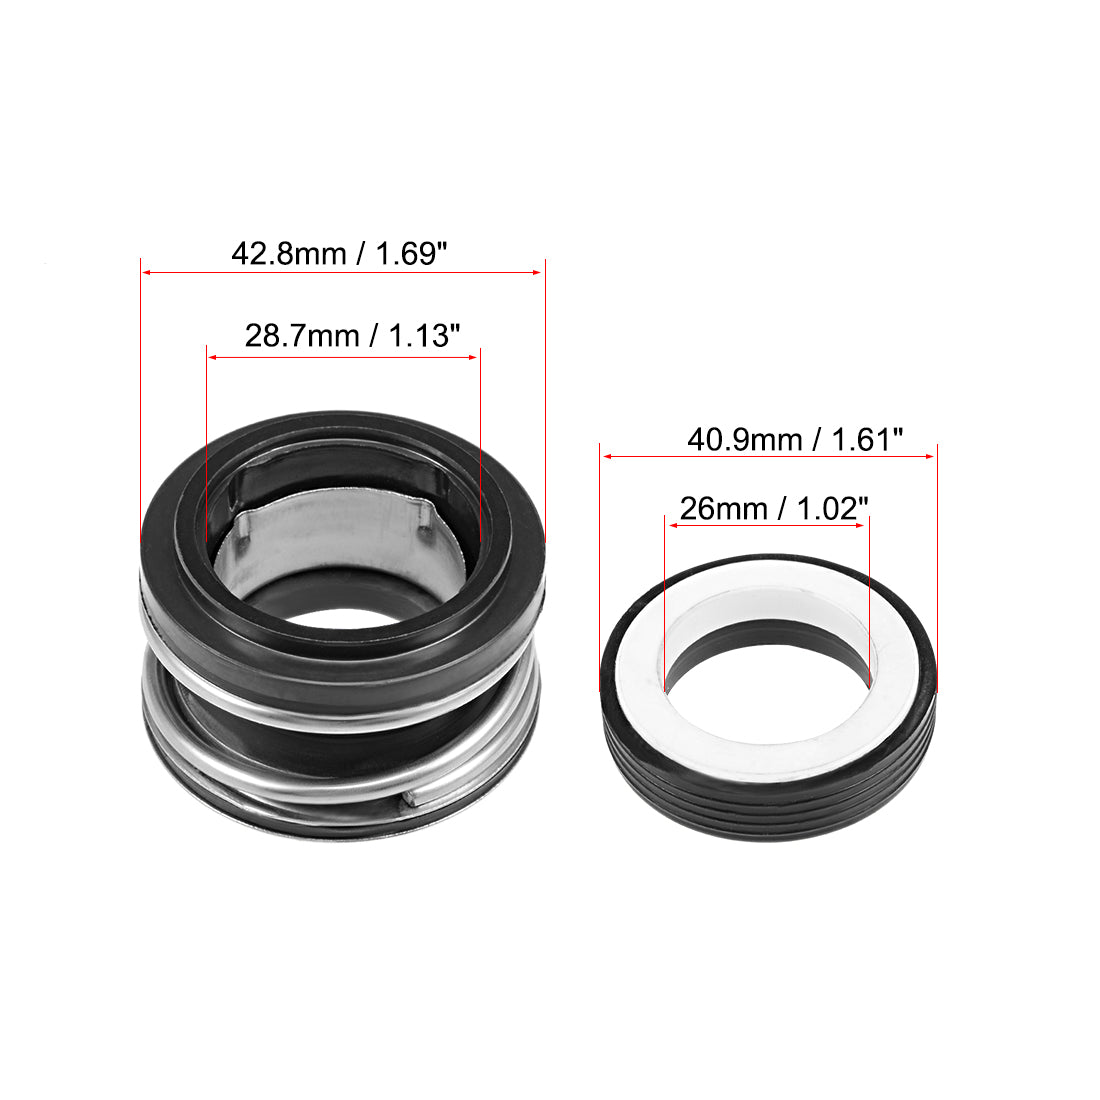 uxcell Uxcell Mechanical Shaft Seal Replacement for Pool Spa Pump 2pcs XJ-25